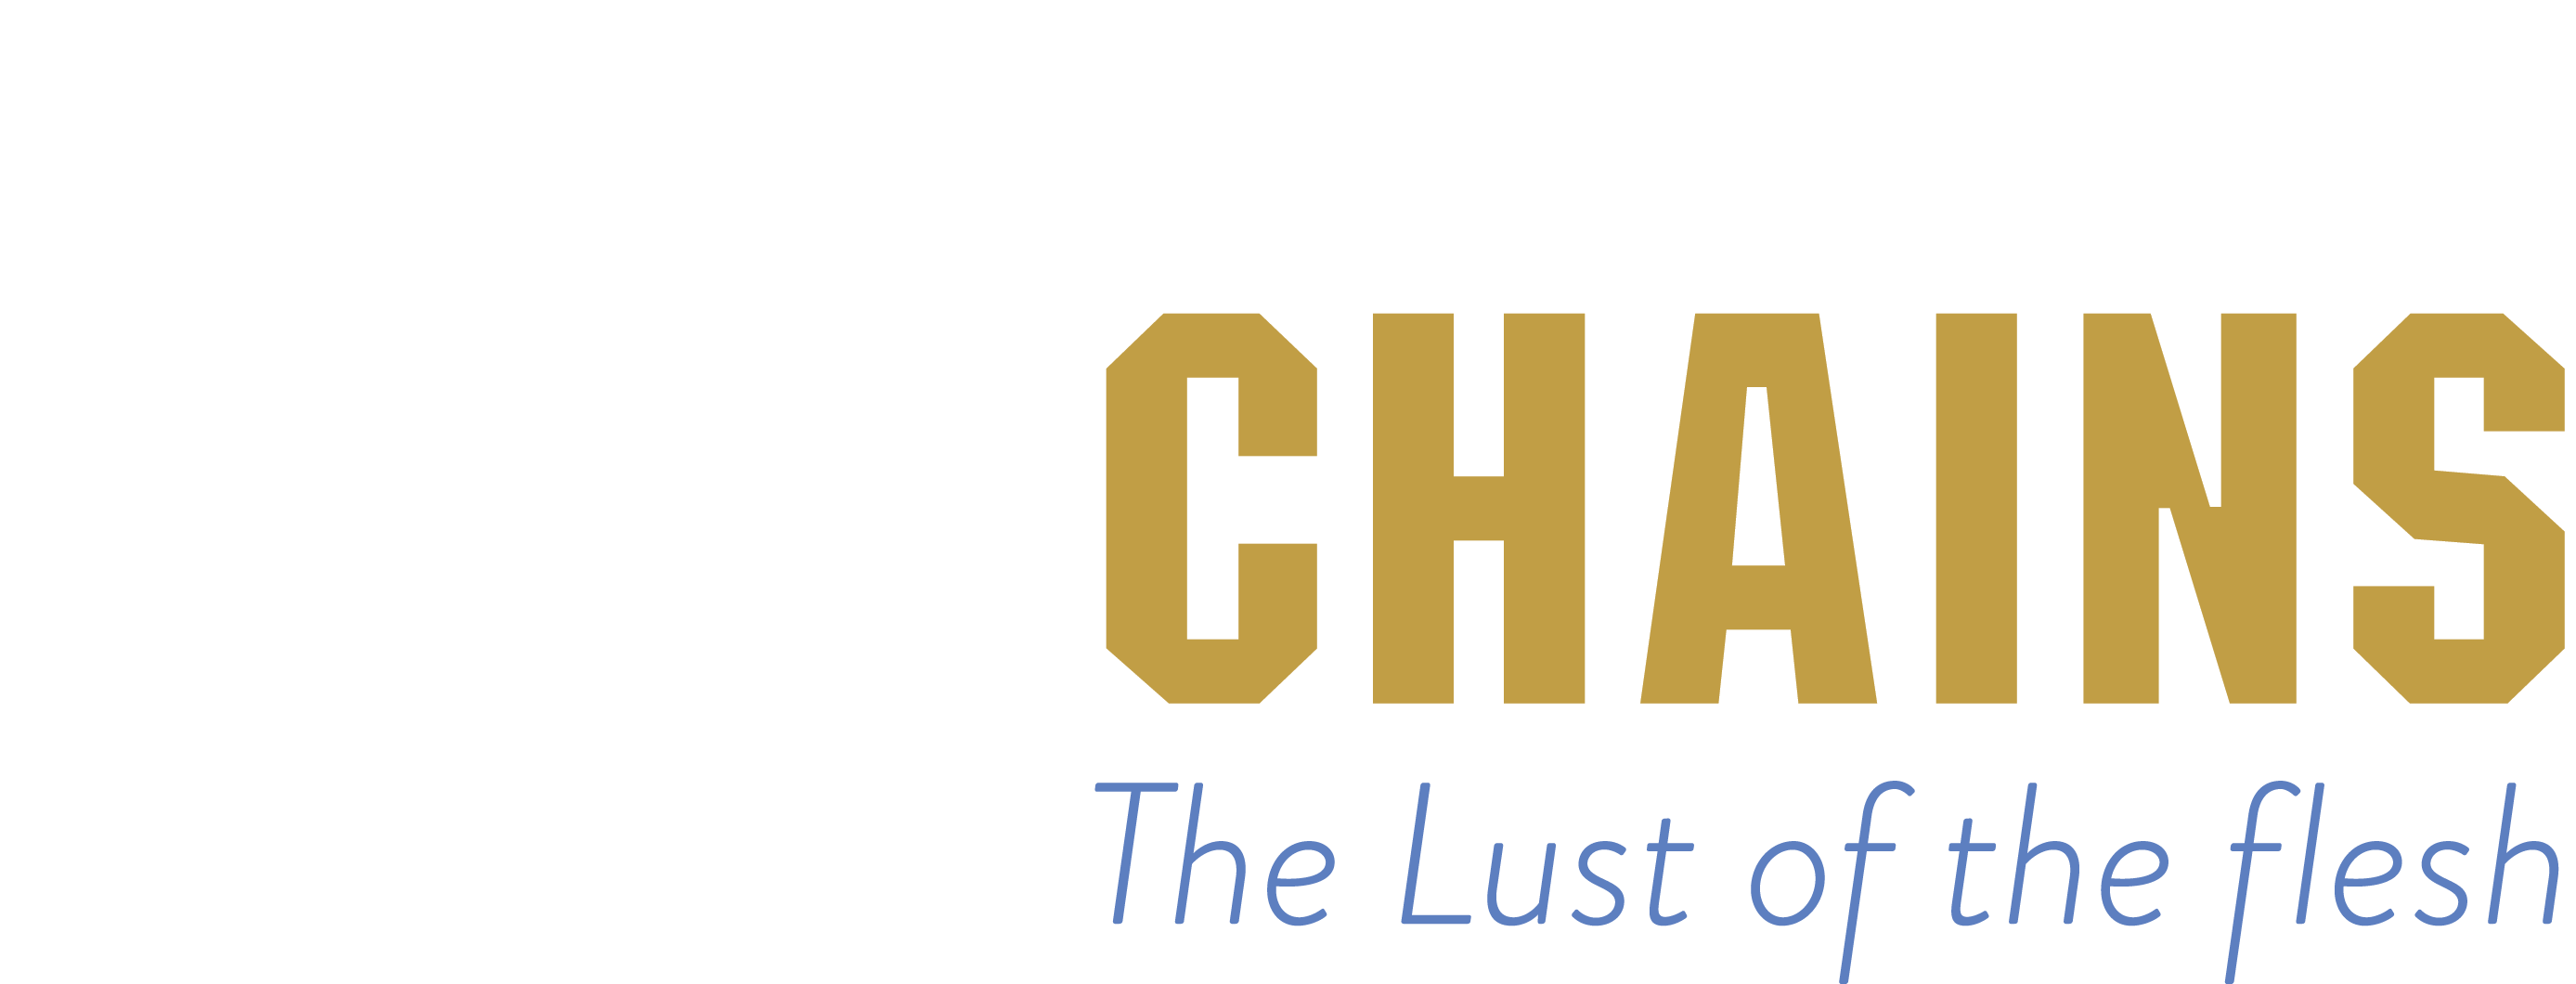 Breaking Hidden Chains – The Lust of the Flesh